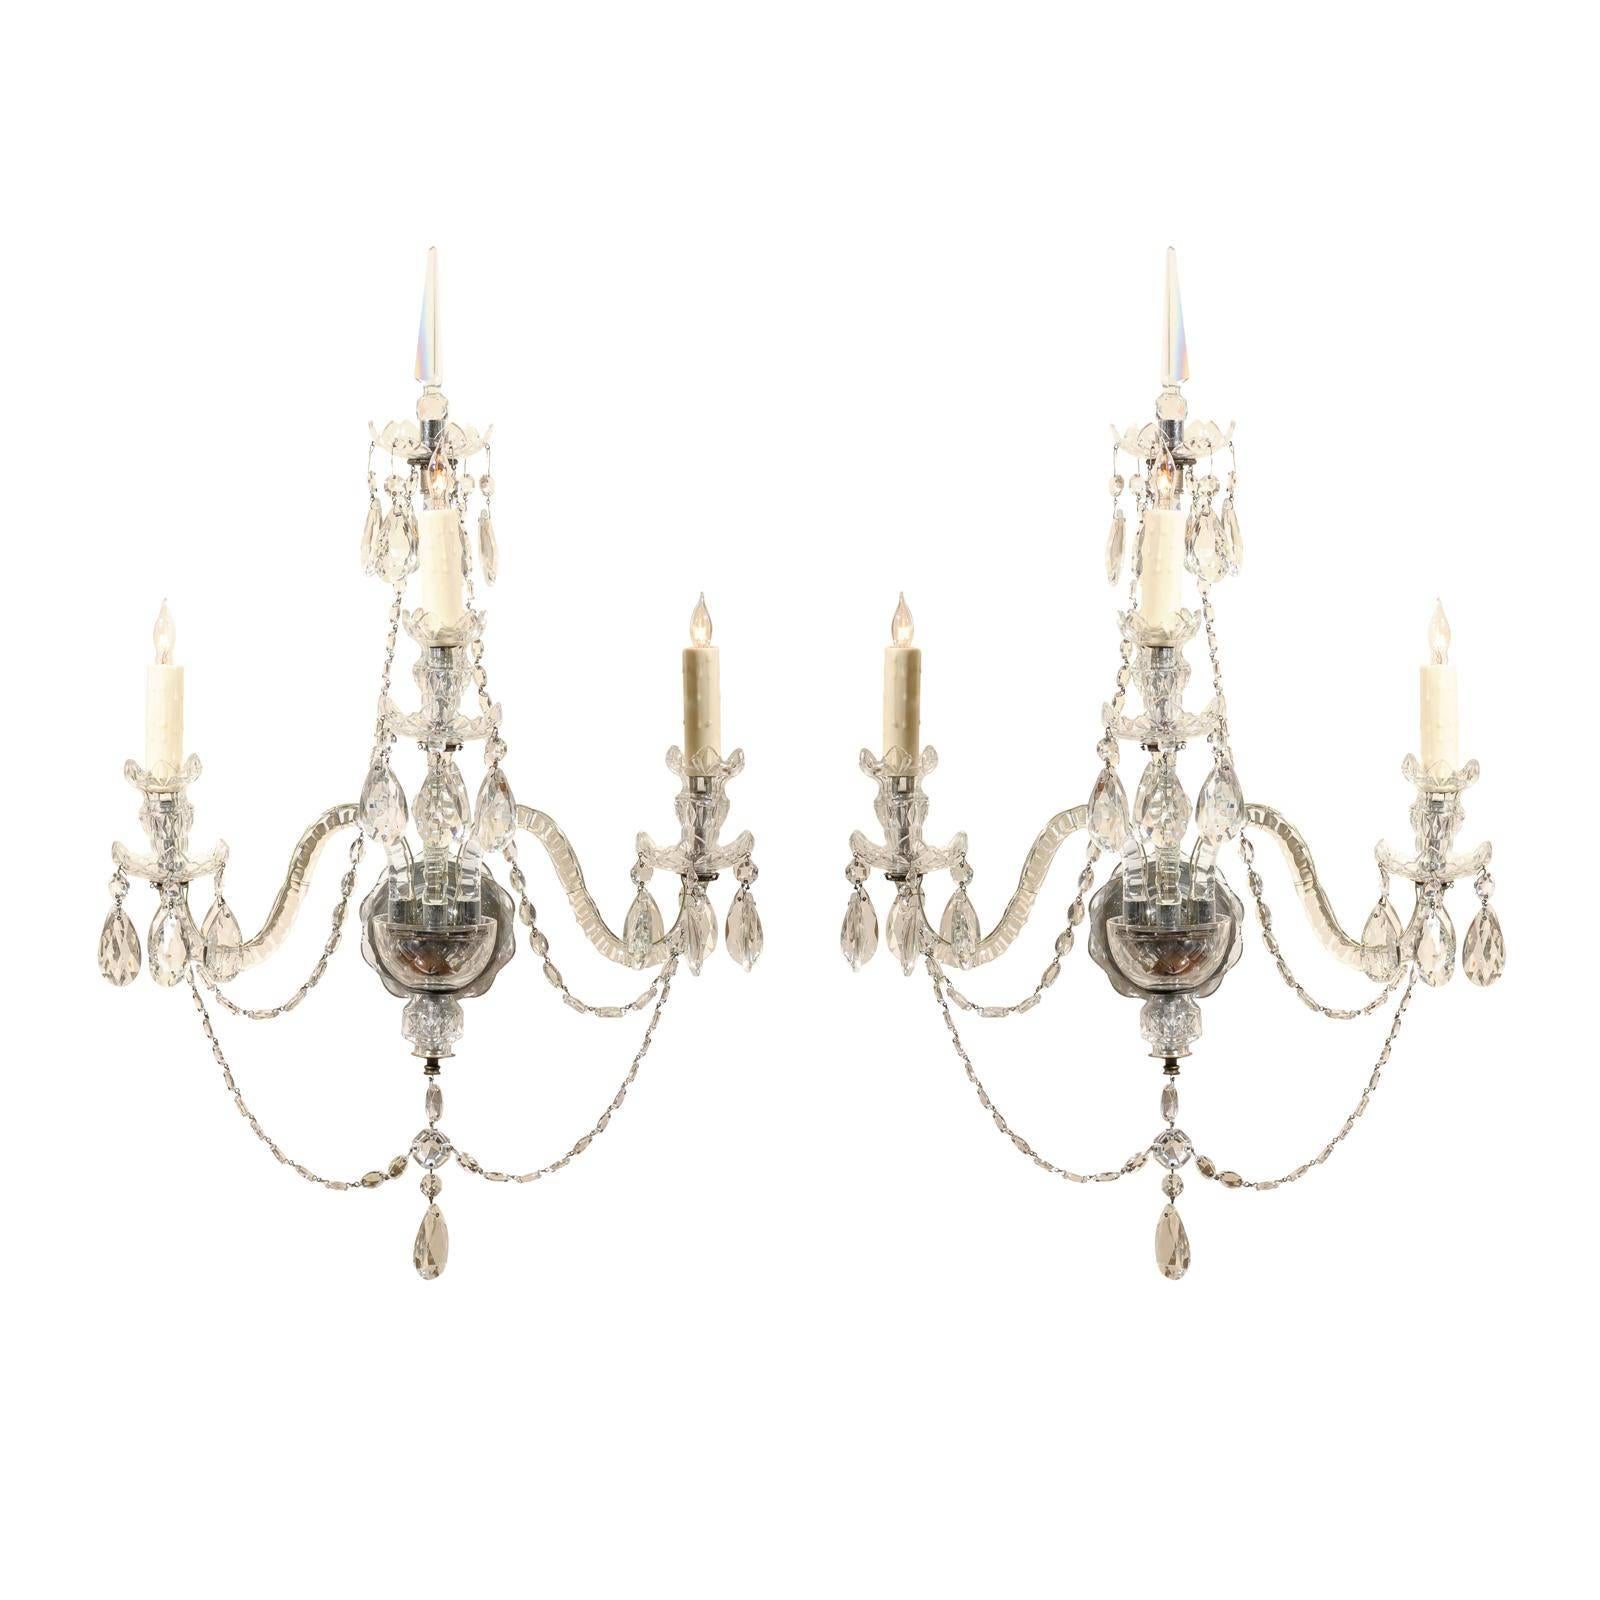 Pair of Cut Crystal Arm Sconces with Three Lights